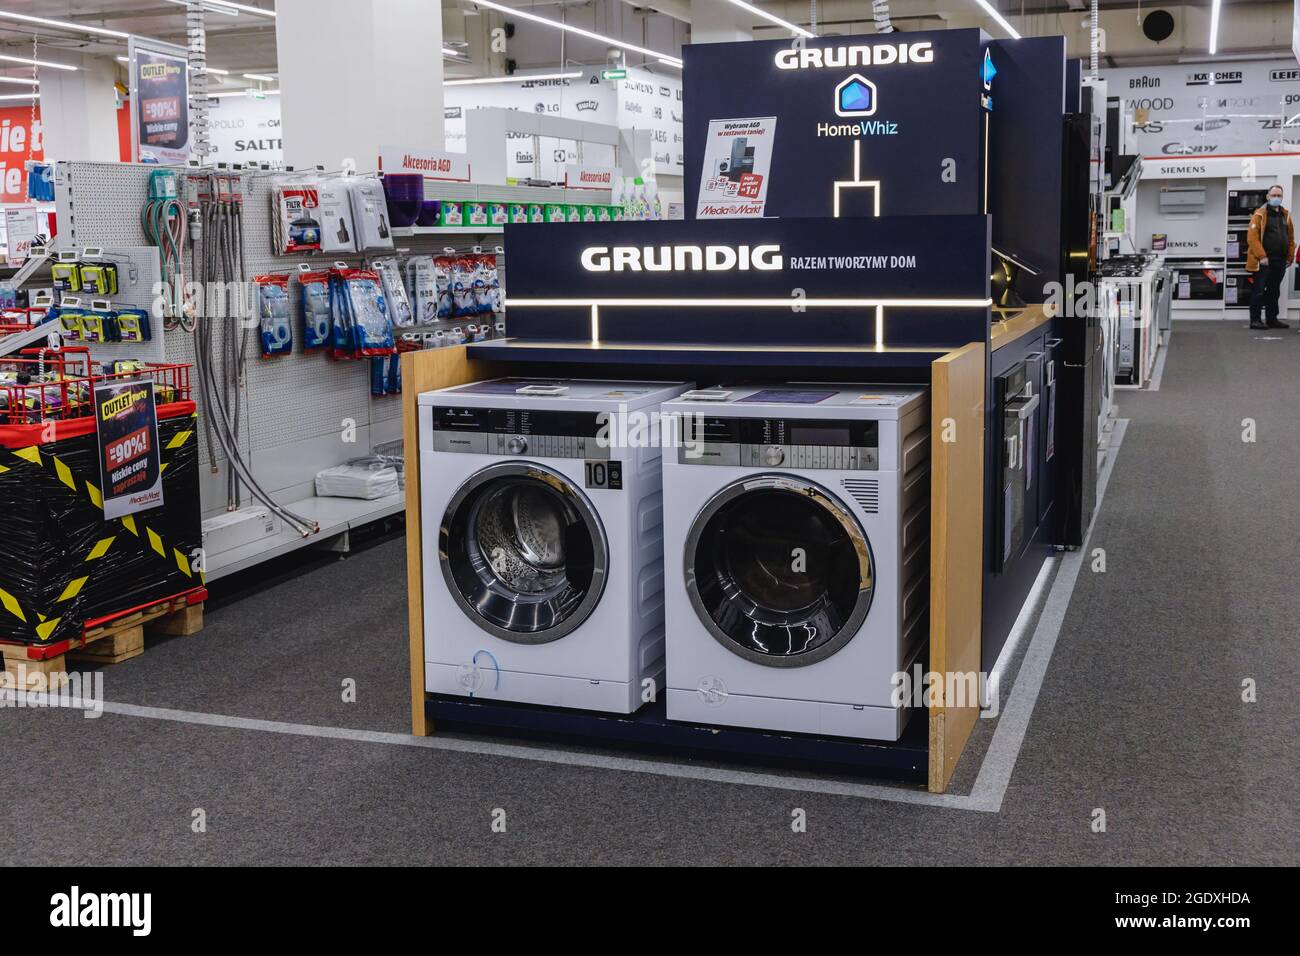 Page 3 - Washing Machines Shop High Resolution Stock Photography and Images  - Alamy